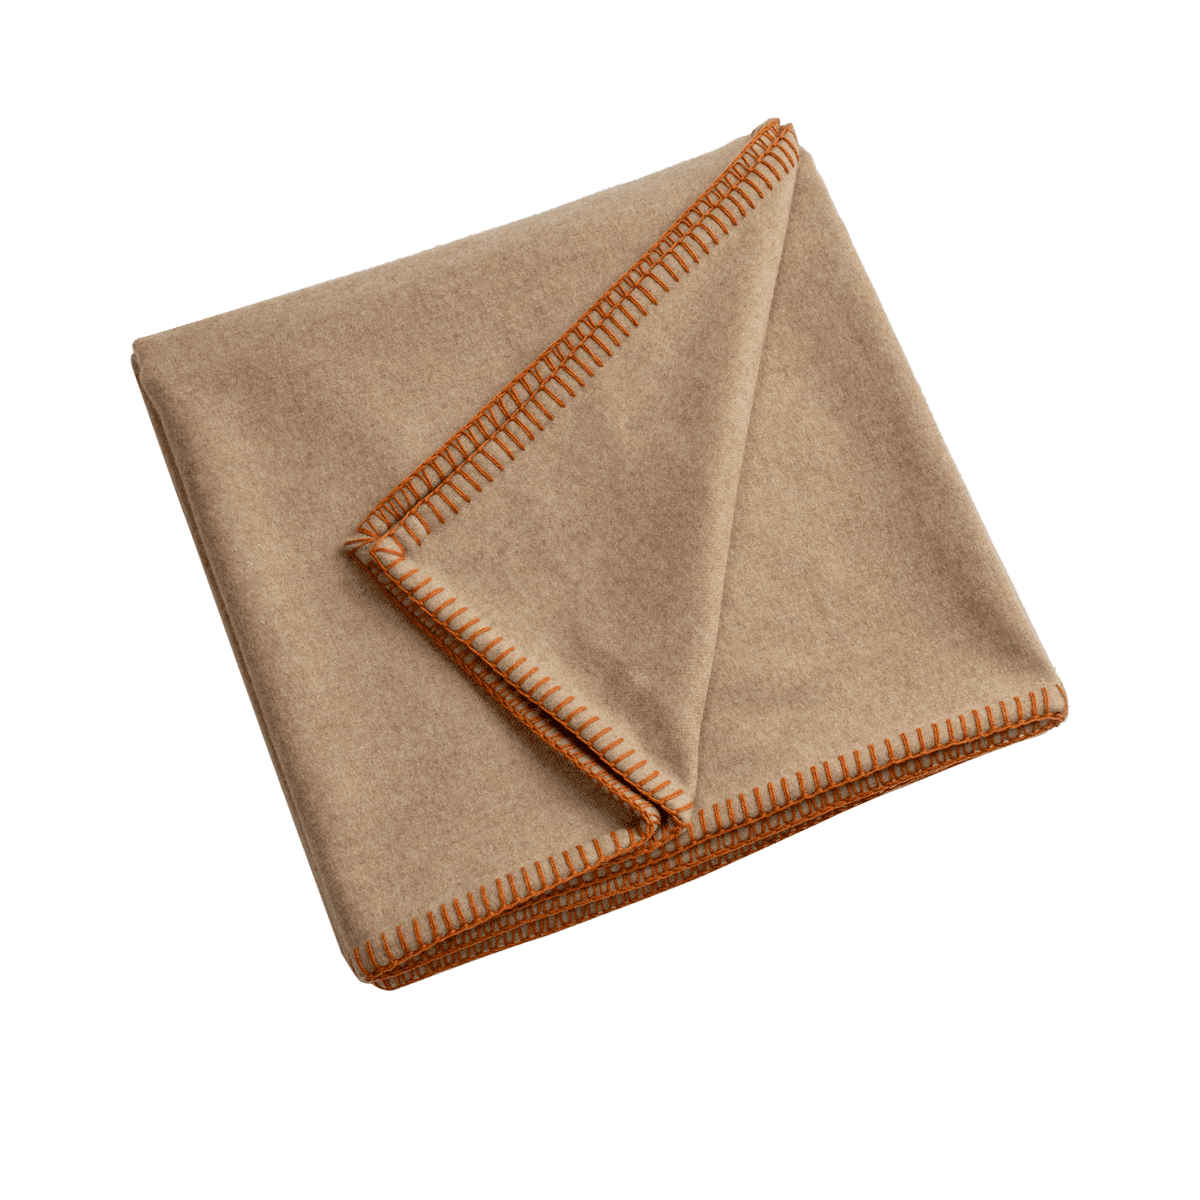 Lewis Rustic Brown 100% Cashmere Throw Blanket